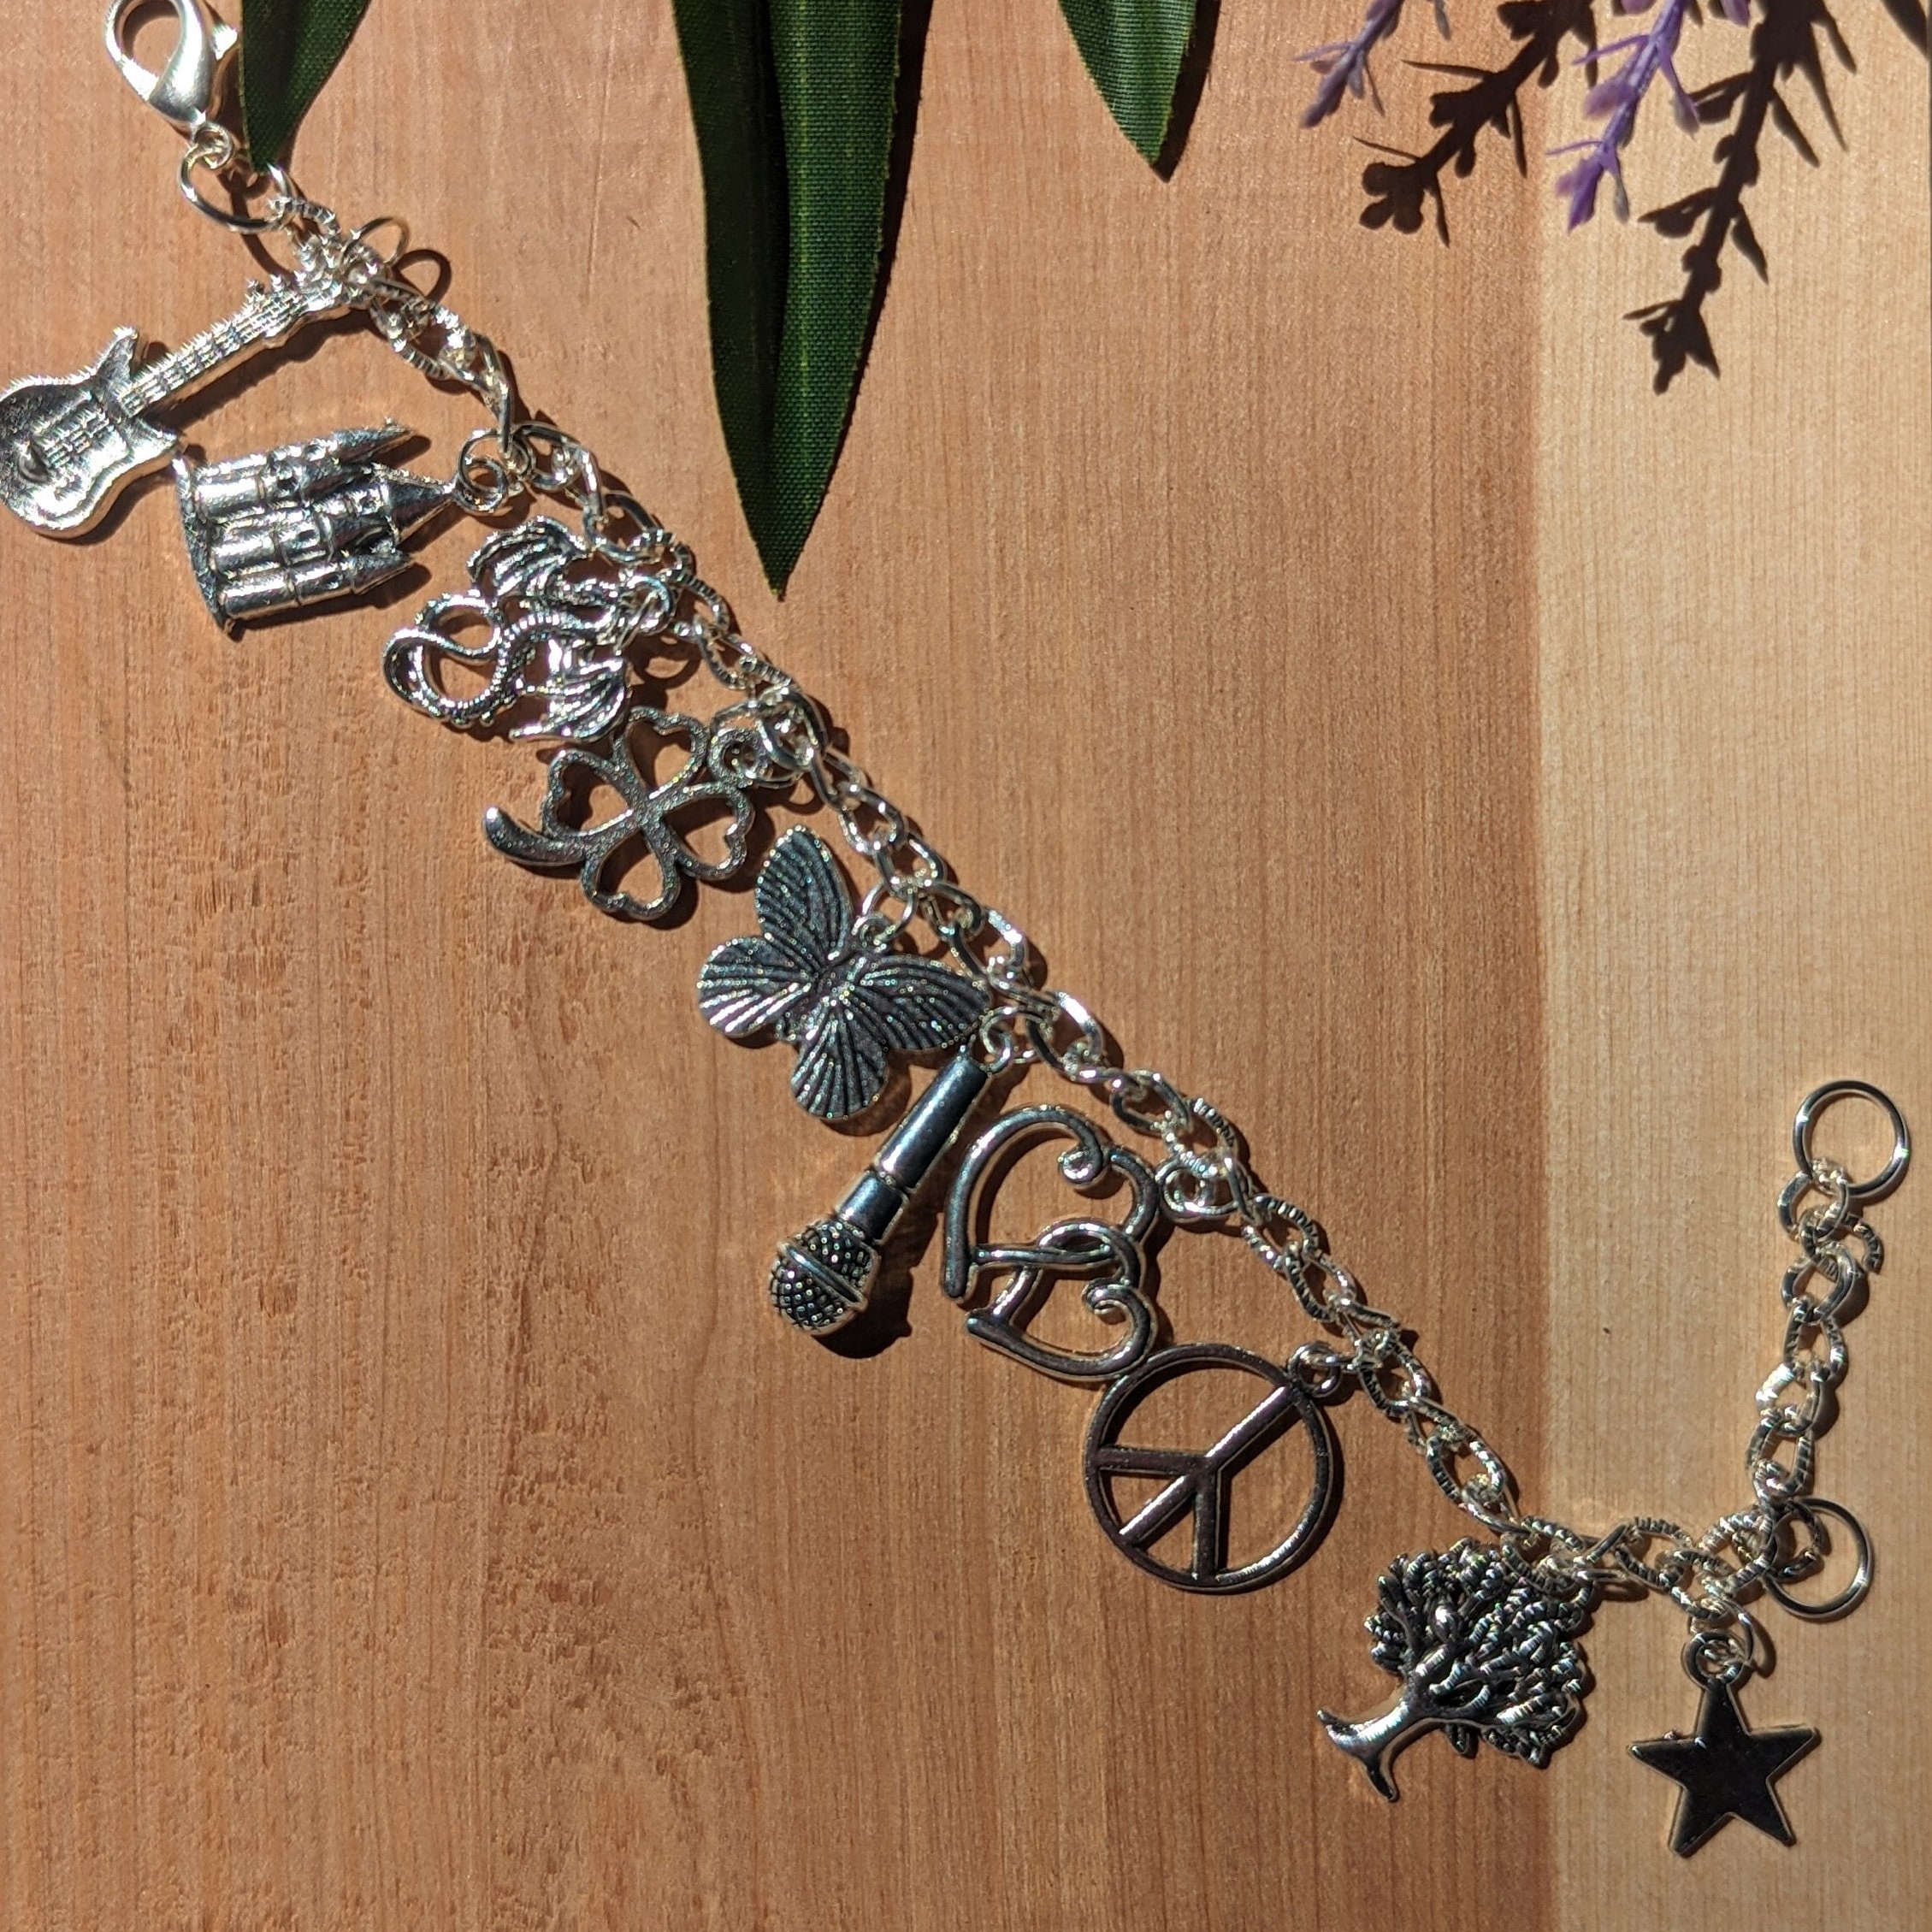 Taylor Swift Eras Charm Adjustable Bejeweled Bracelet Inspired by Midnights  Lover Reputation Folklore Red Jewelry Swiftie Eras Tour Gift